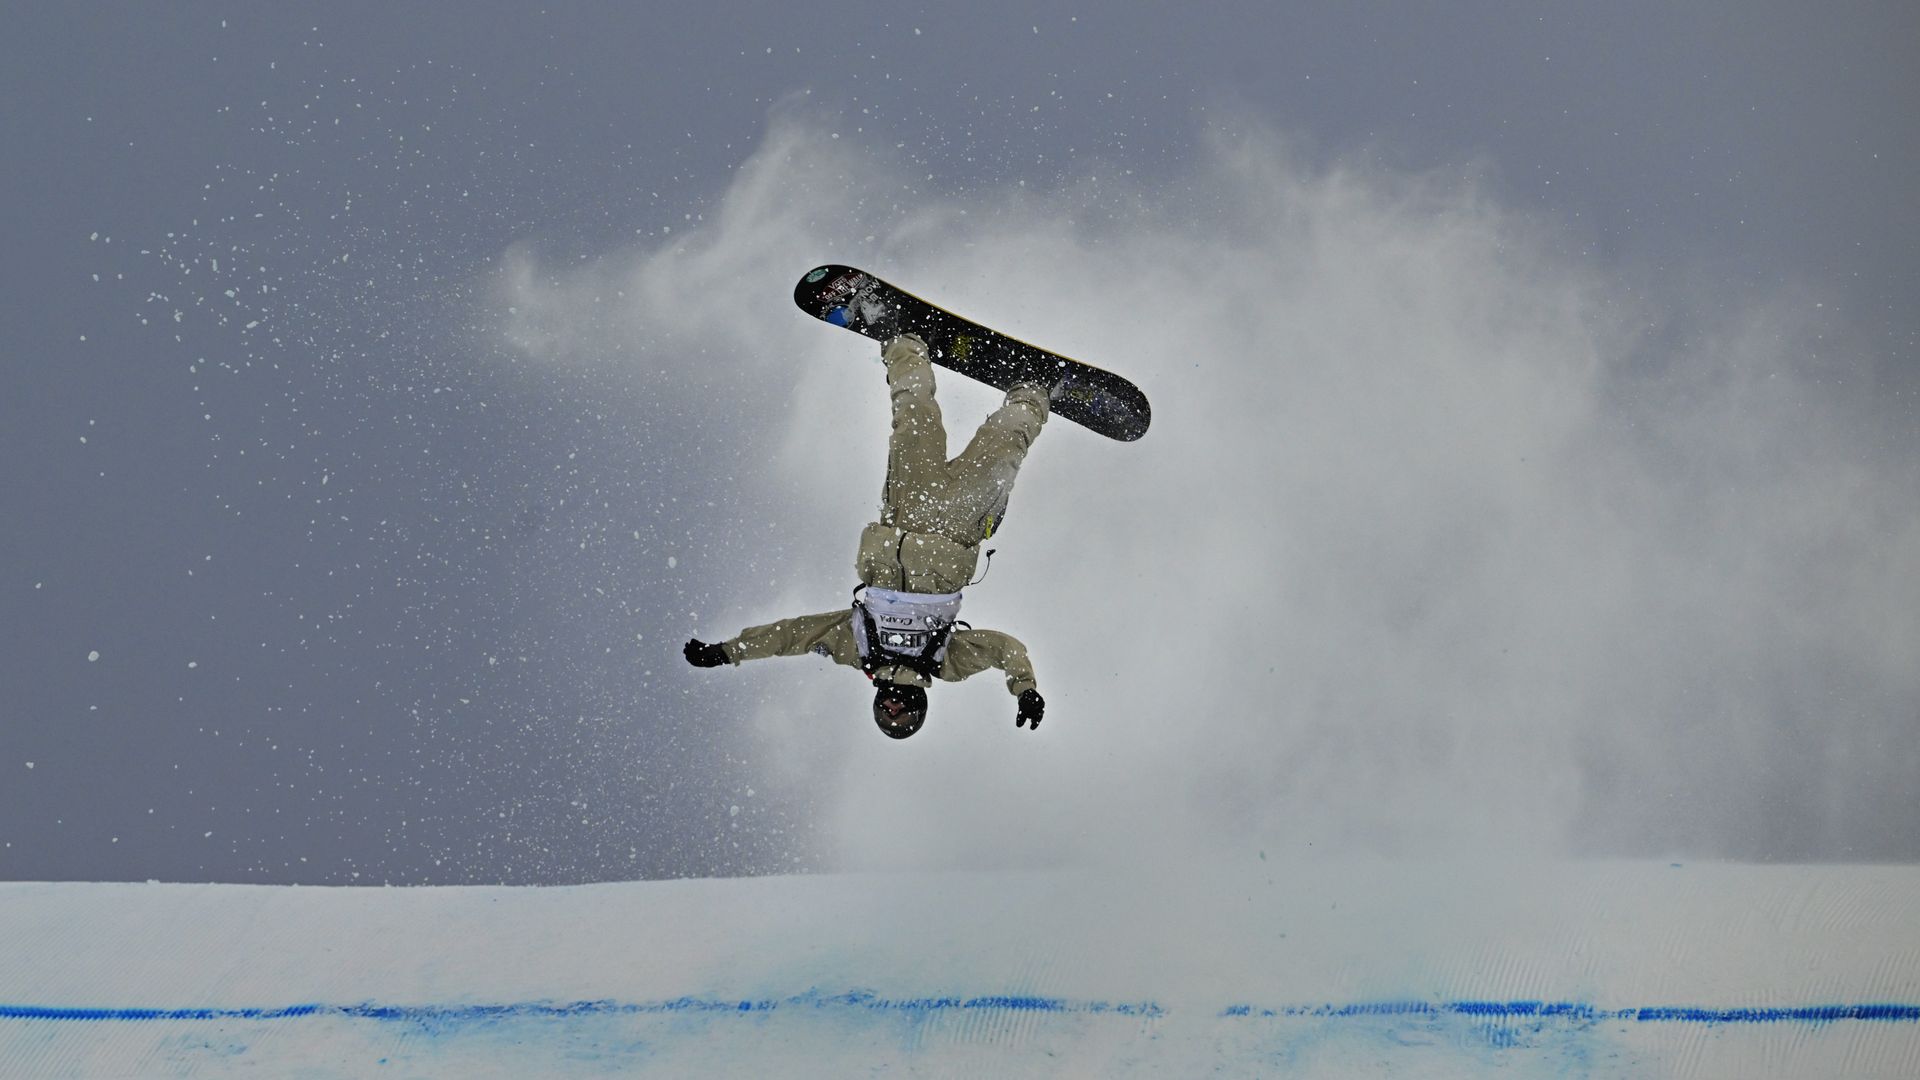 Fridtjof Sæther Tischendorf of Norway finished up in 4th in the X Games Aspen Snowboard Knuckle Huck finals Sunday. Photo: RJ Sangosti/Denver Post via Getty Images